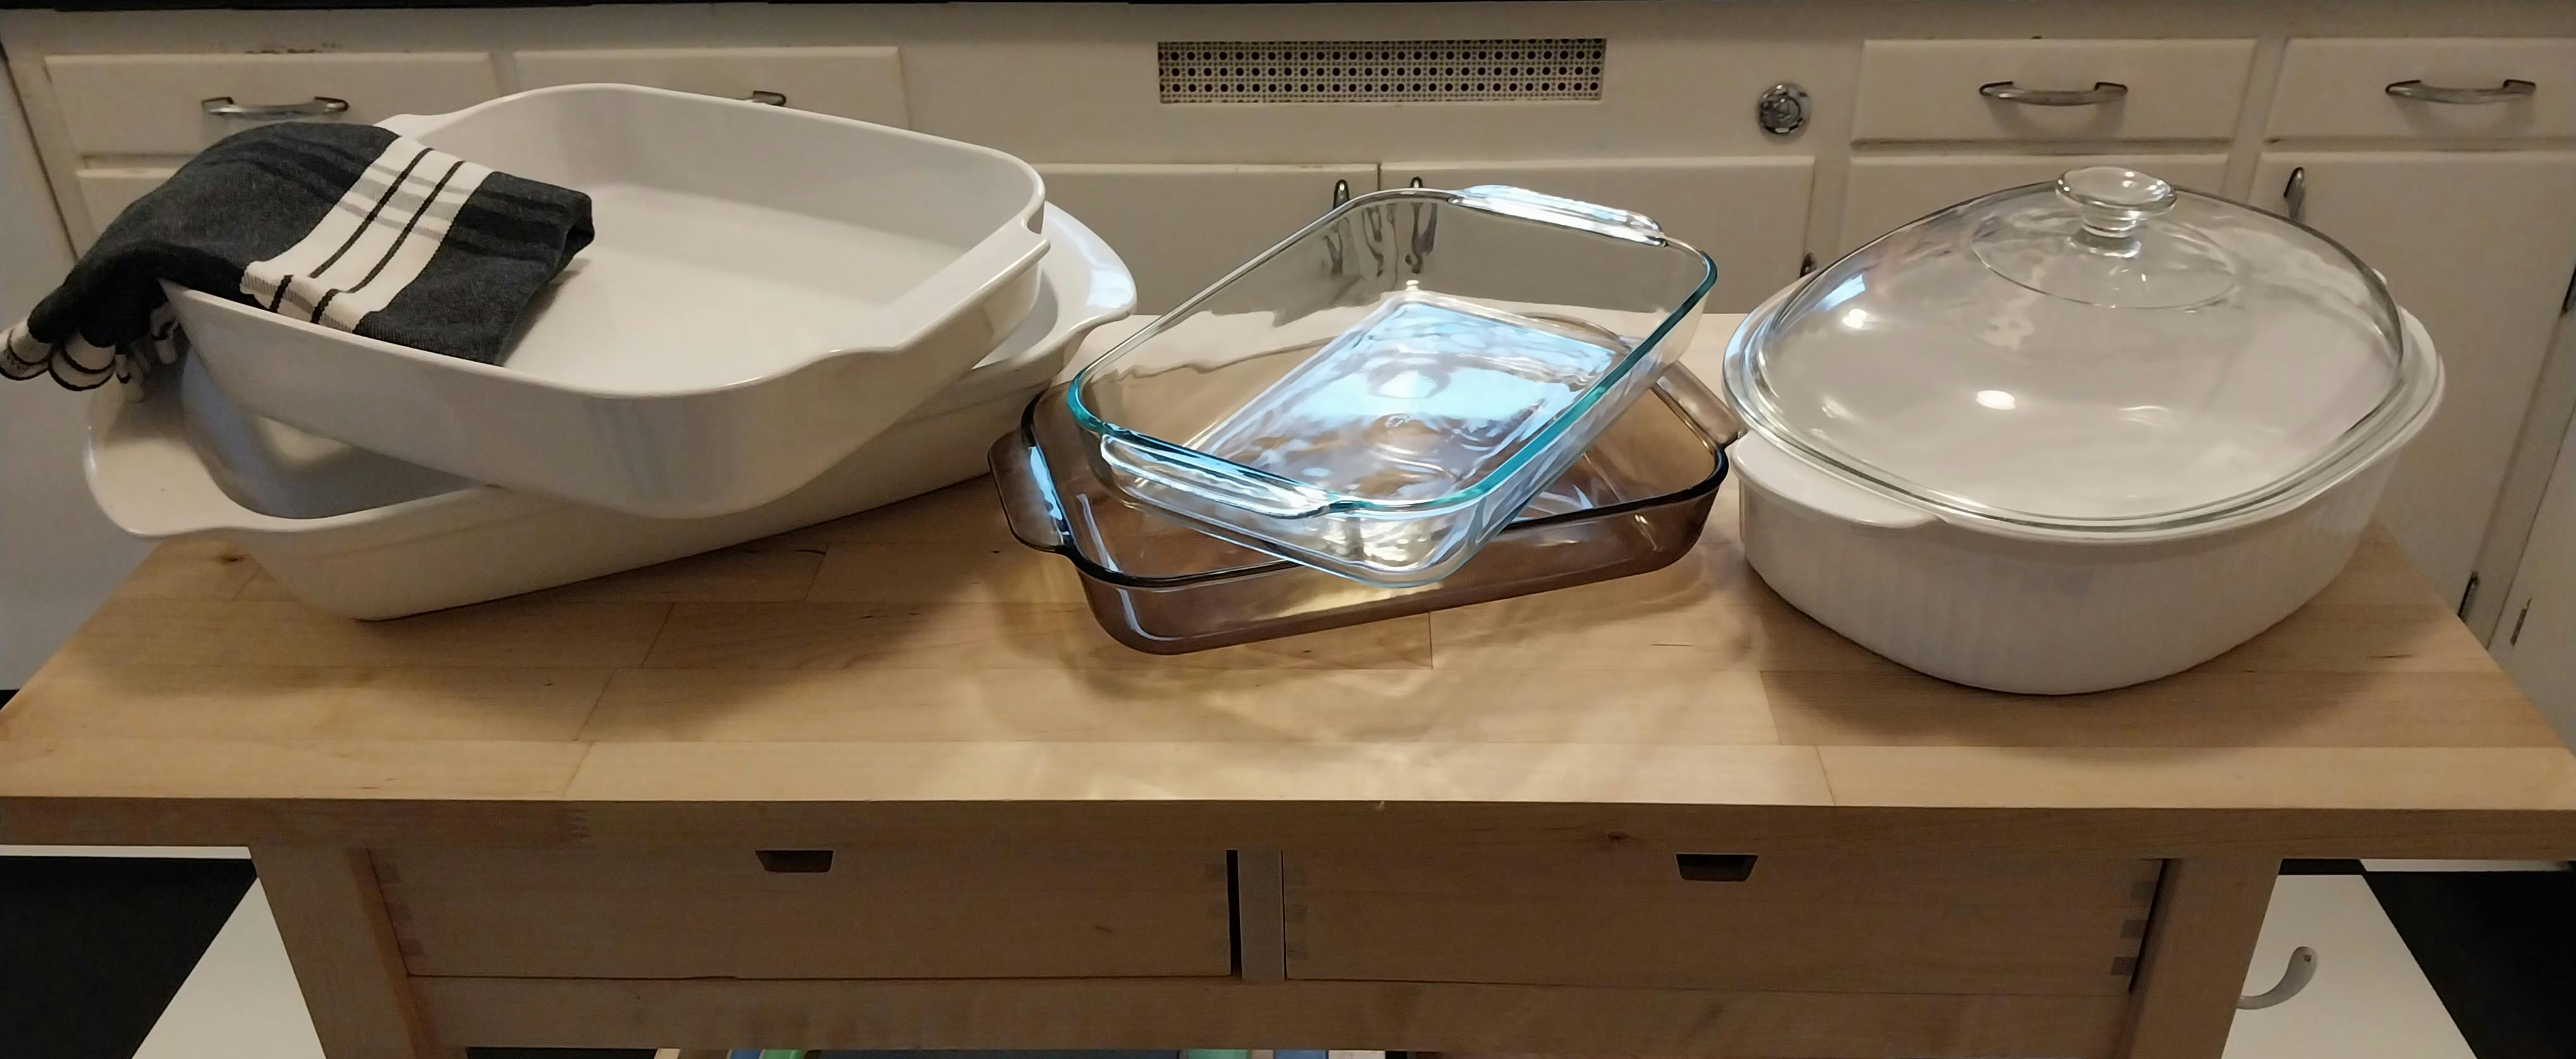 cookware - Is my Anchor Hocking Oven Basics glass measuring cup inaccurate?  - Seasoned Advice